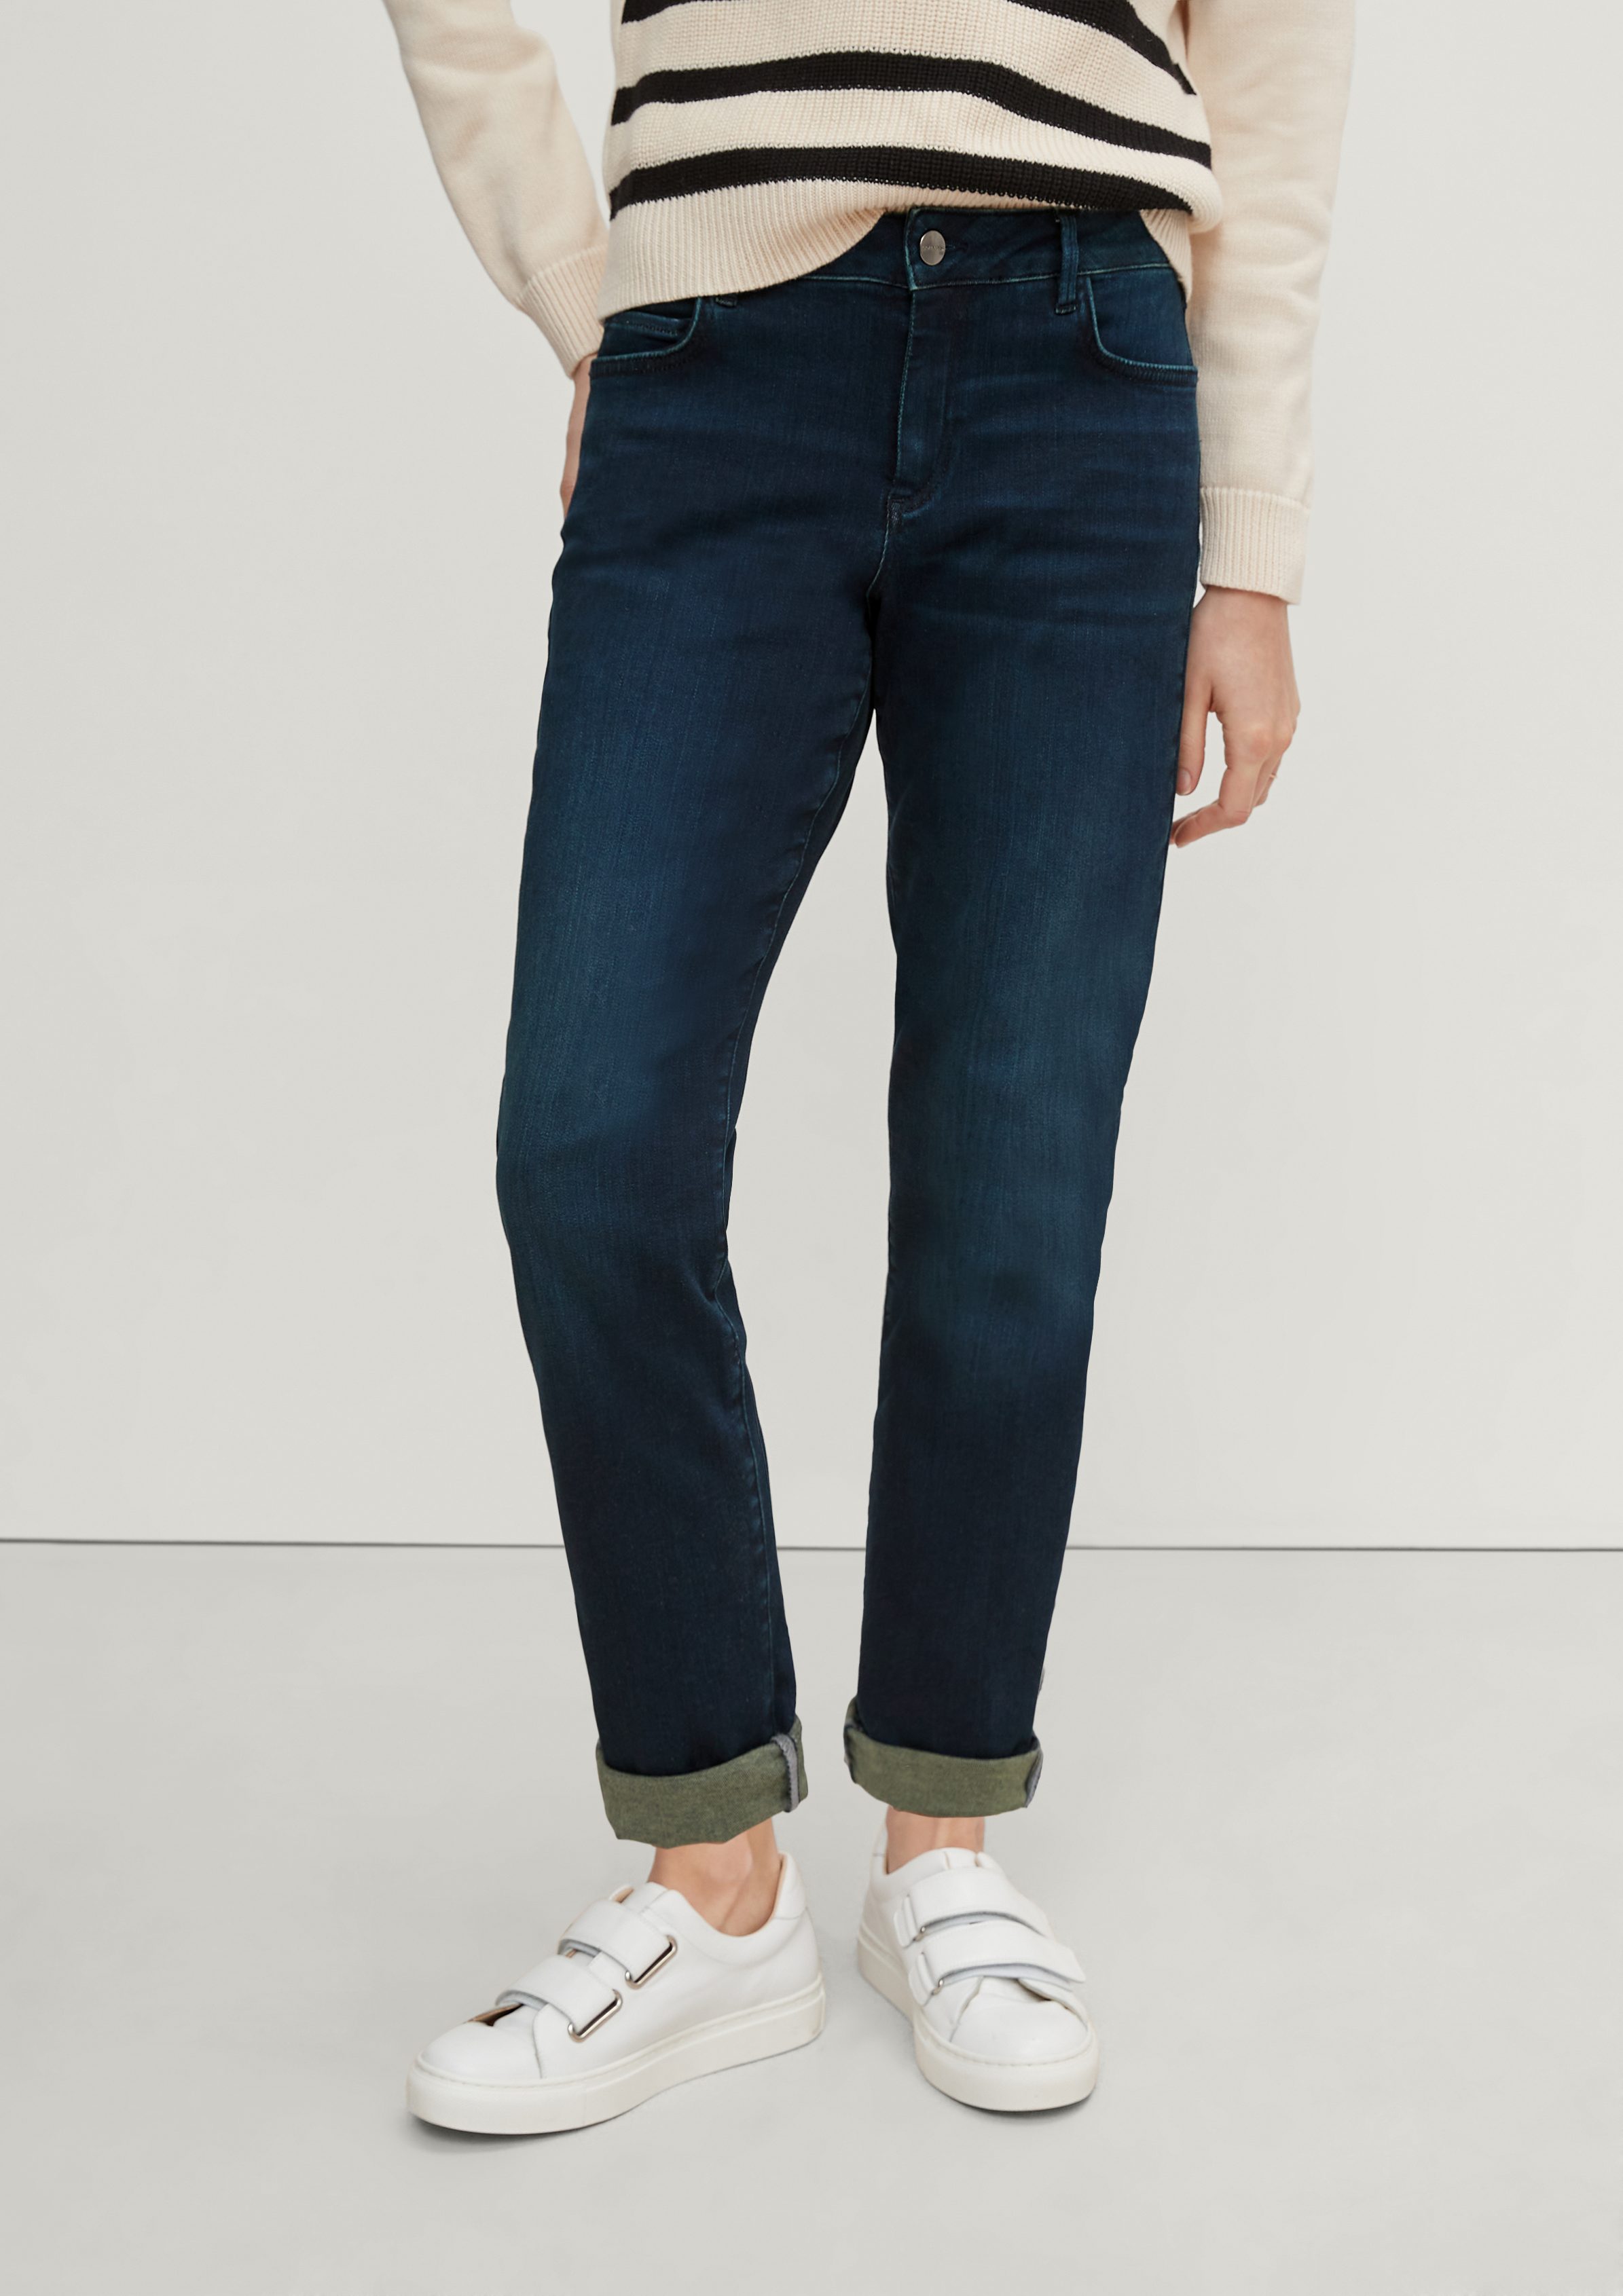 leg-Jeans Slim: 7/8-Jeans Waschung ankle Straight Comma